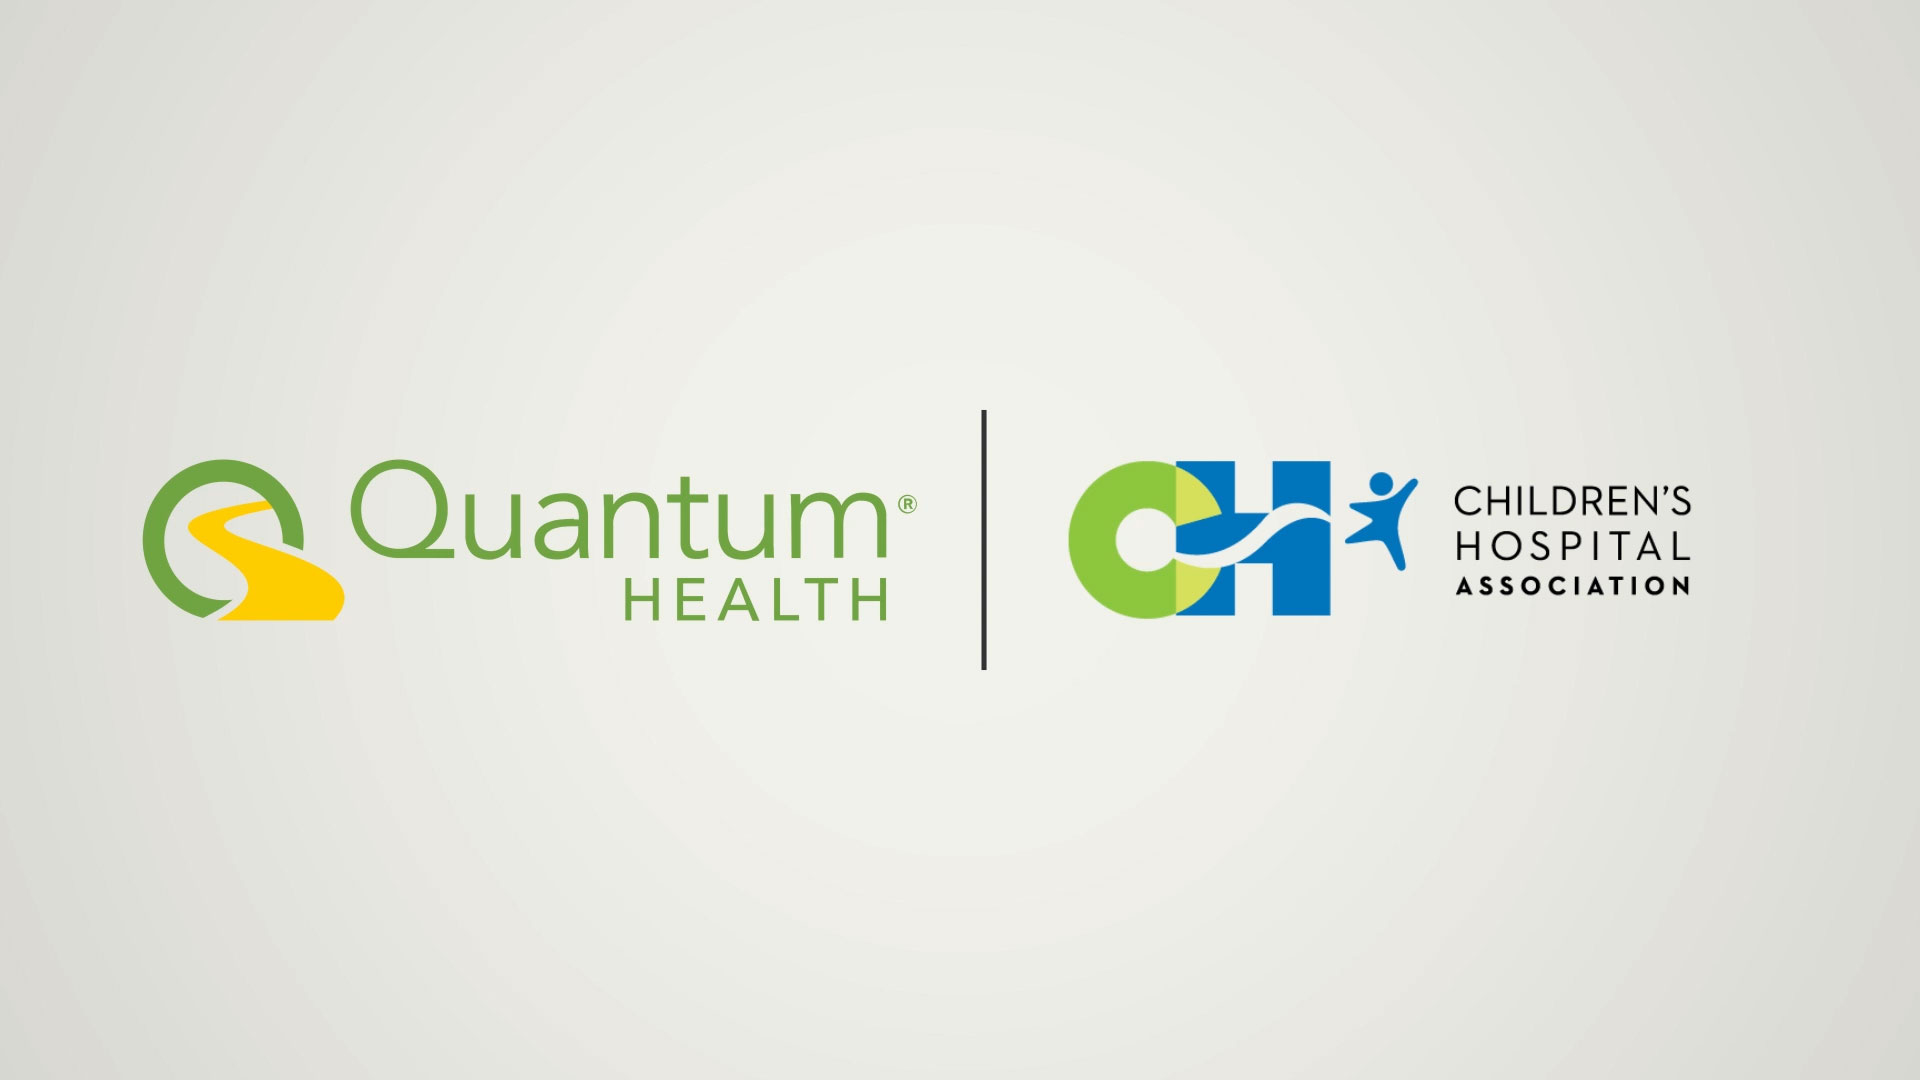 Quantum Health and the Children’s Hospital Association (CHA) are joining together to offer Quantum Health’s healthcare navigation platform among all CHA member hospitals.